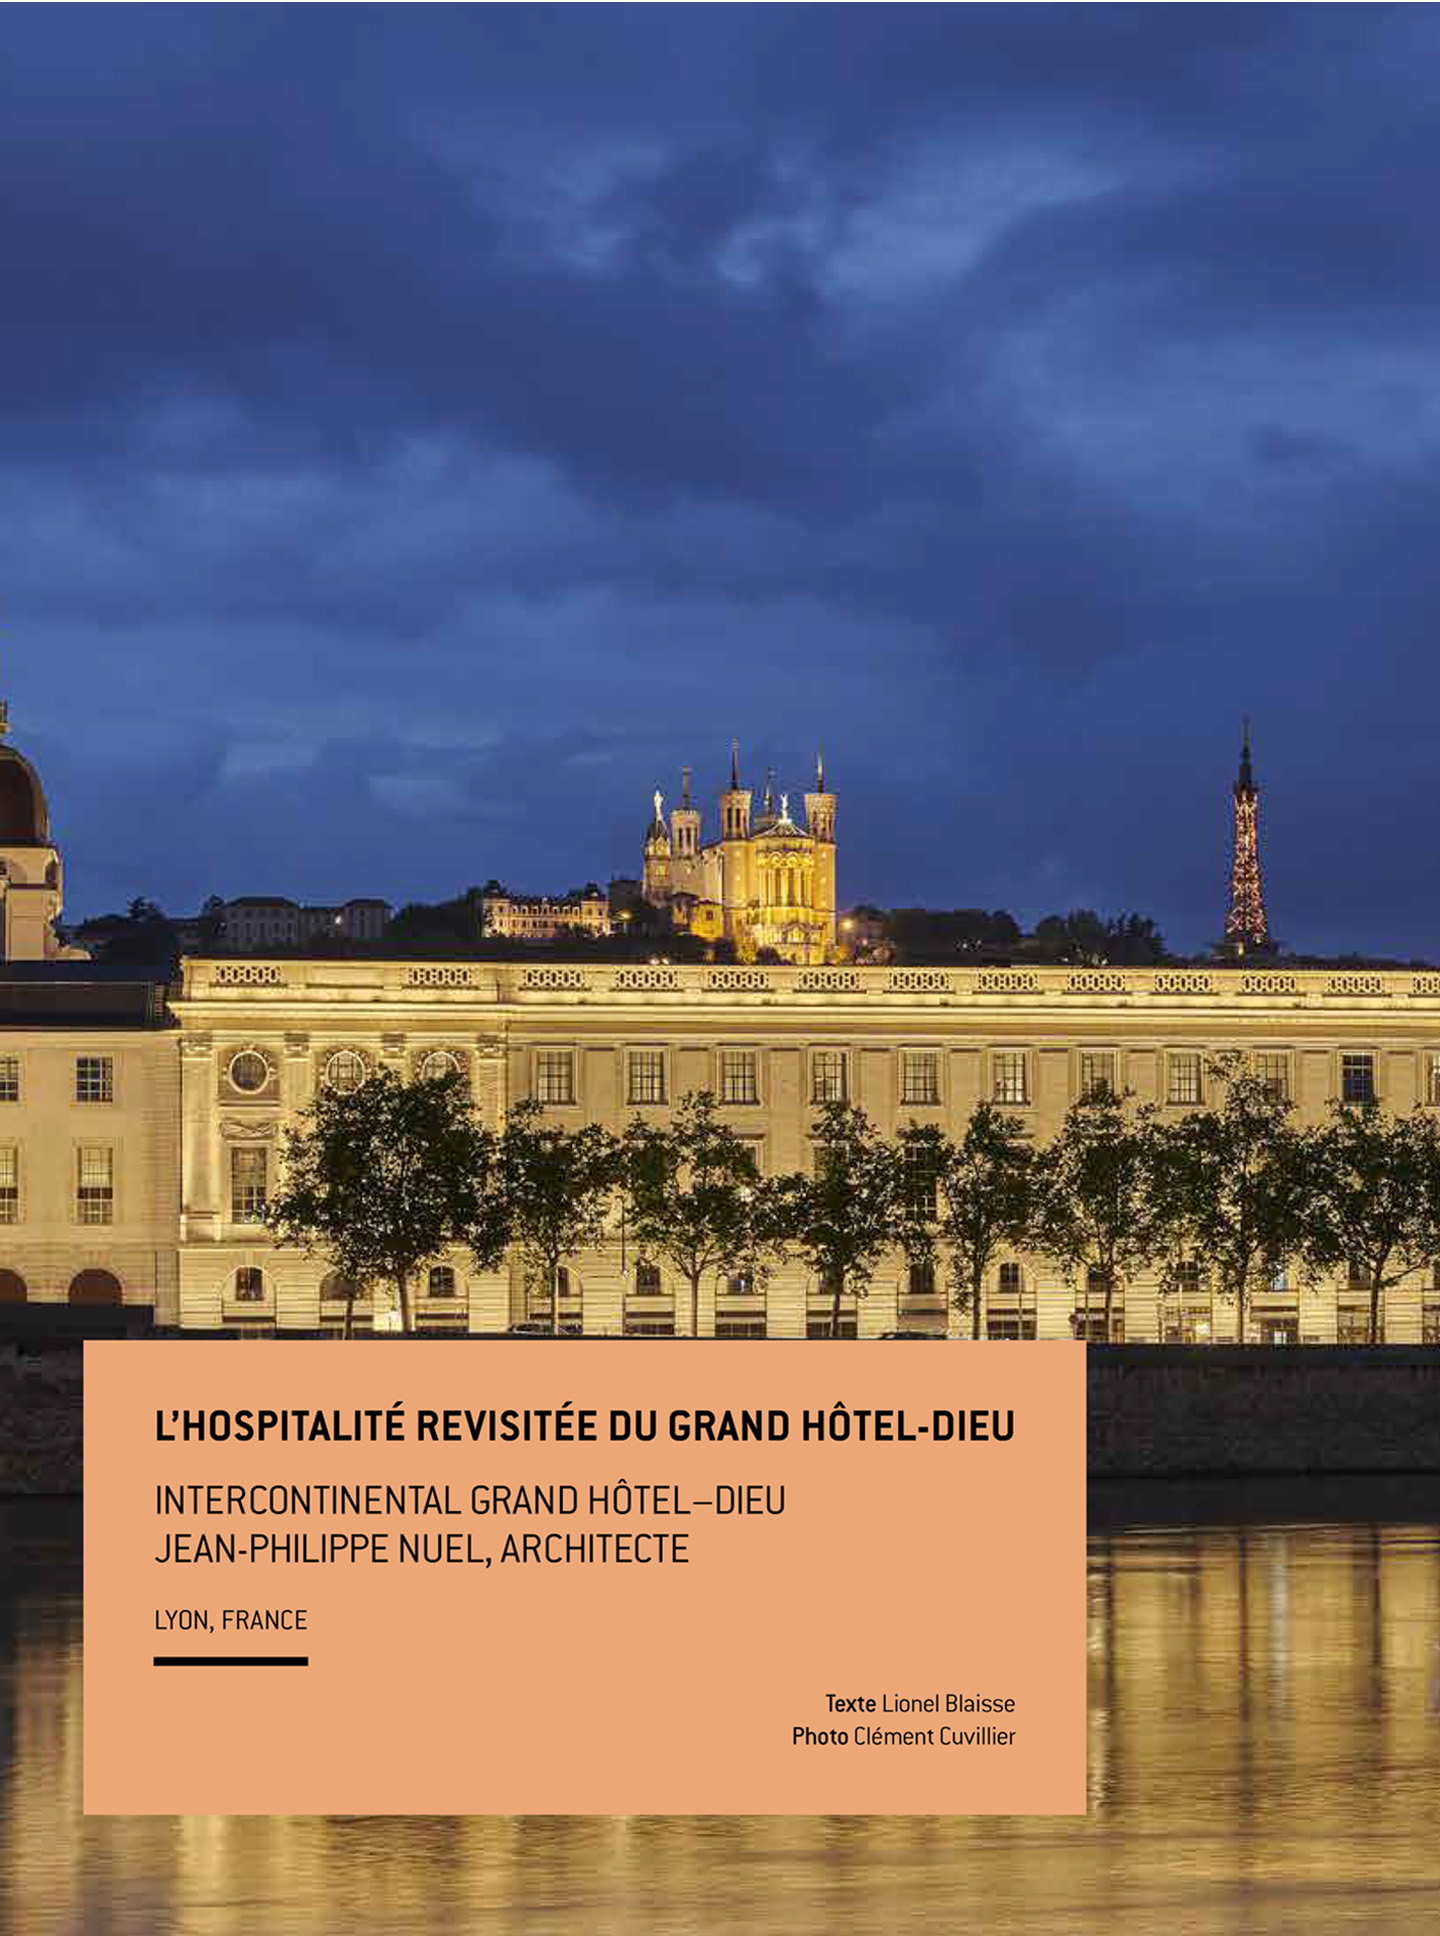 Article on the InterContinental Lyon Hotel Dieu realized by the studio jean-Philippe Nuel in the magazine Archistorm, new luxury hotel, luxury interior design, historical heritage